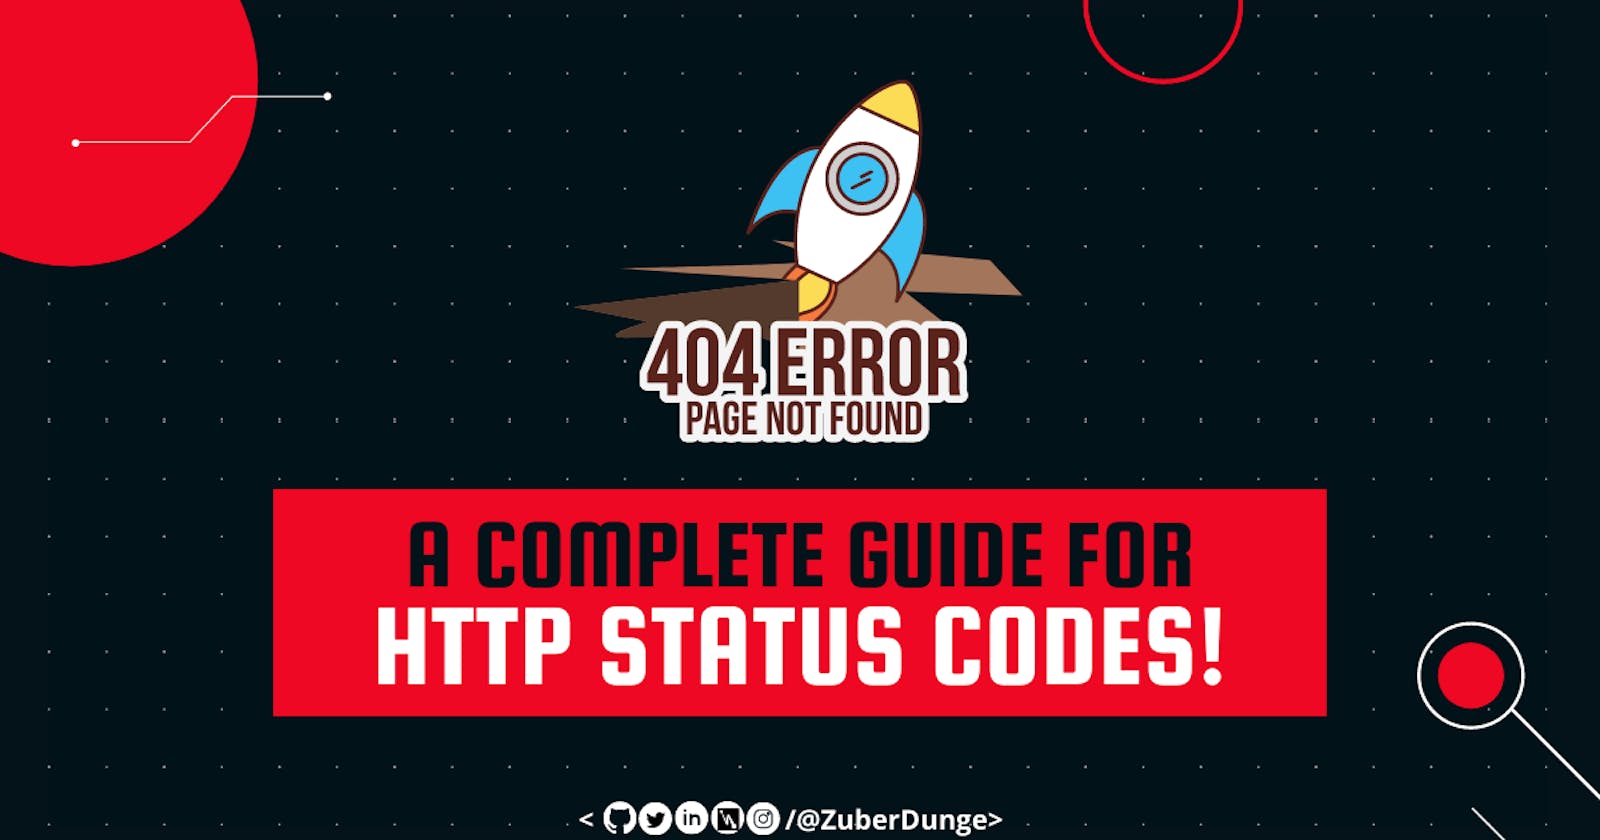 A Complete Guide for HTTP Status Codes!